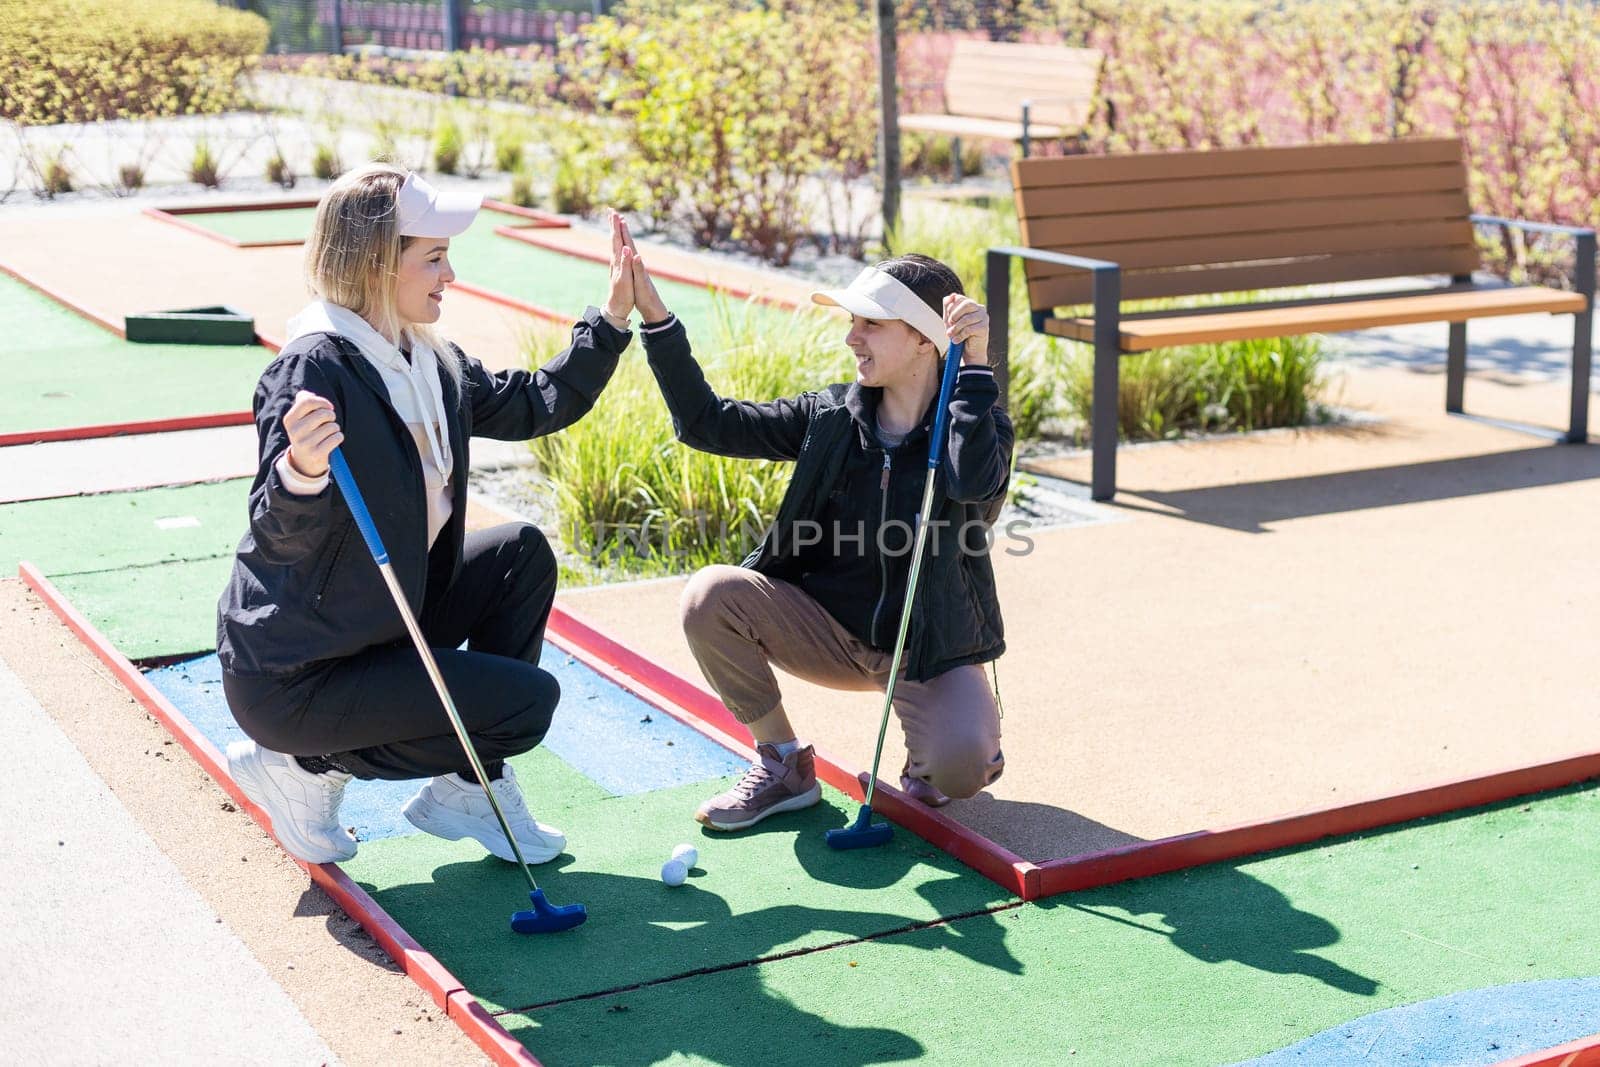 mother and daughter playing mini golf, children enjoying summer vacation. High quality photo